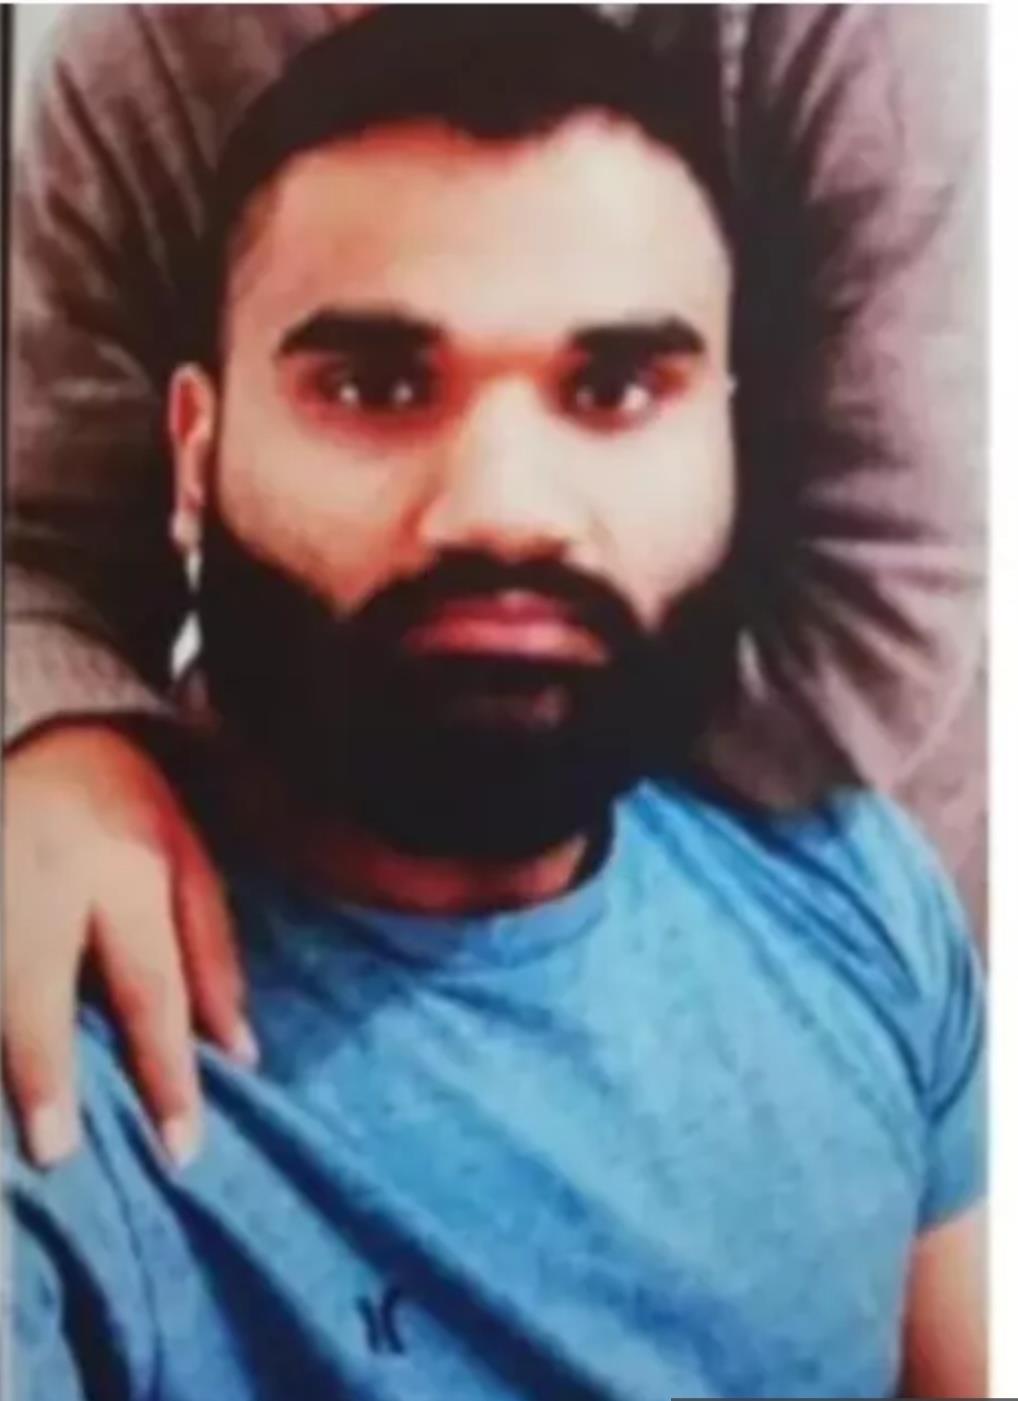 Sidhu Moosewala murder mastermind Goldy Brar appears in YouTube interview, claims he is not detained by US police